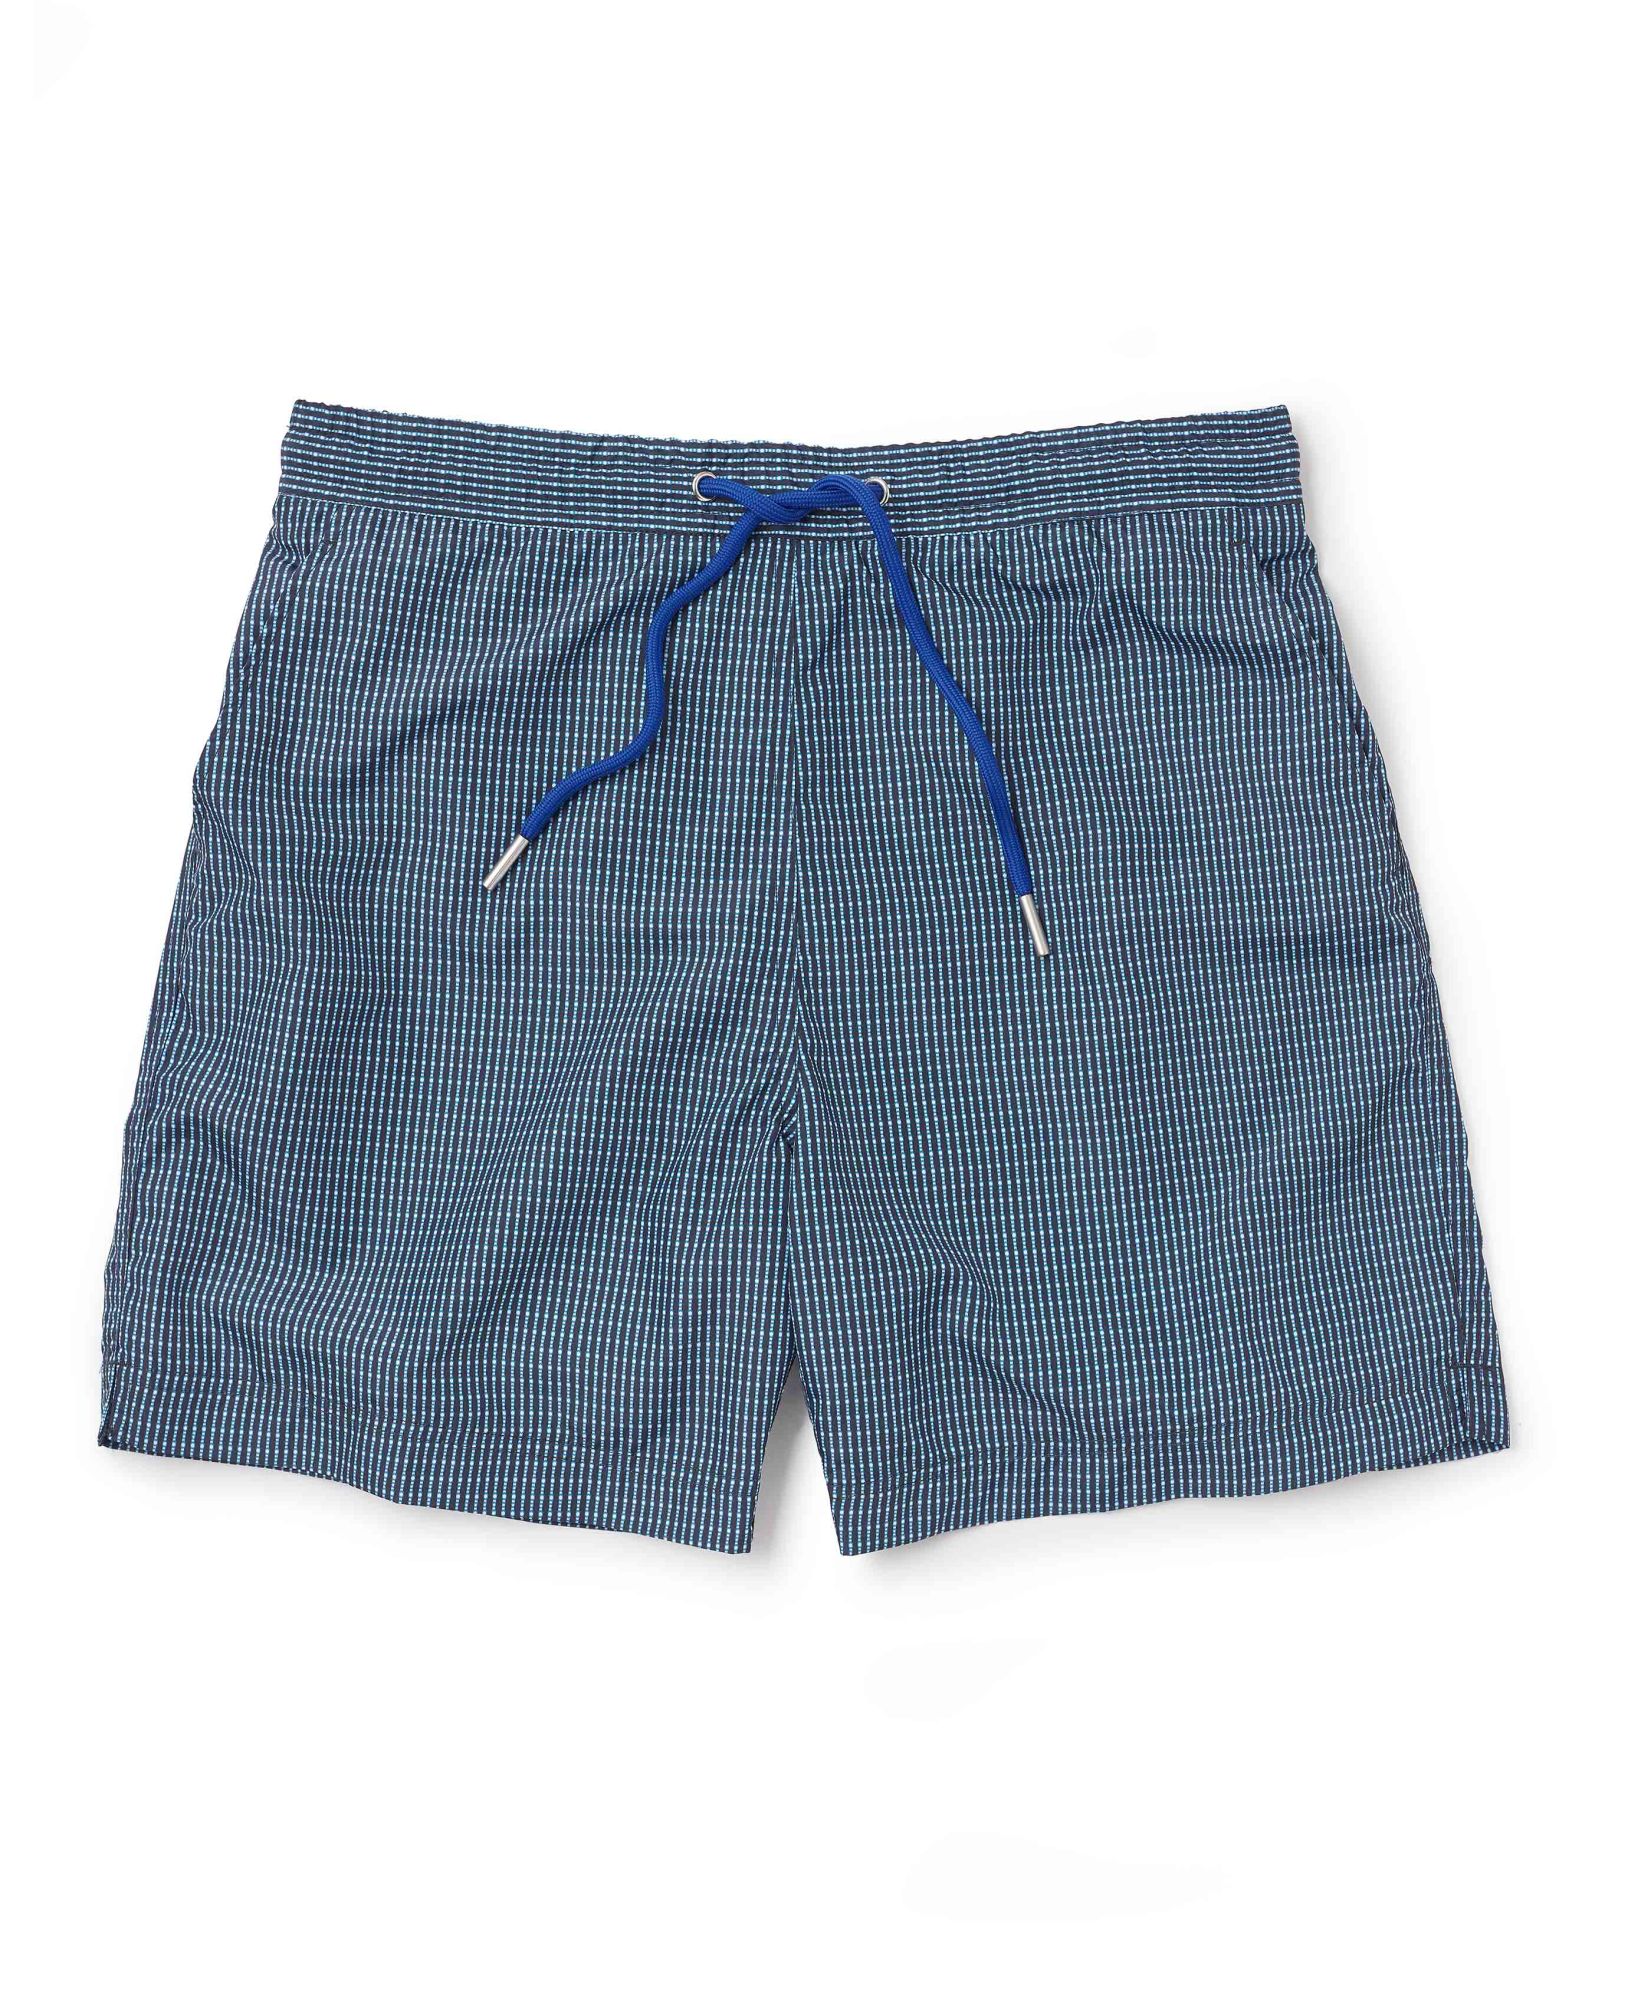 Blue Dotted Stripe Recycled Swim Shorts M